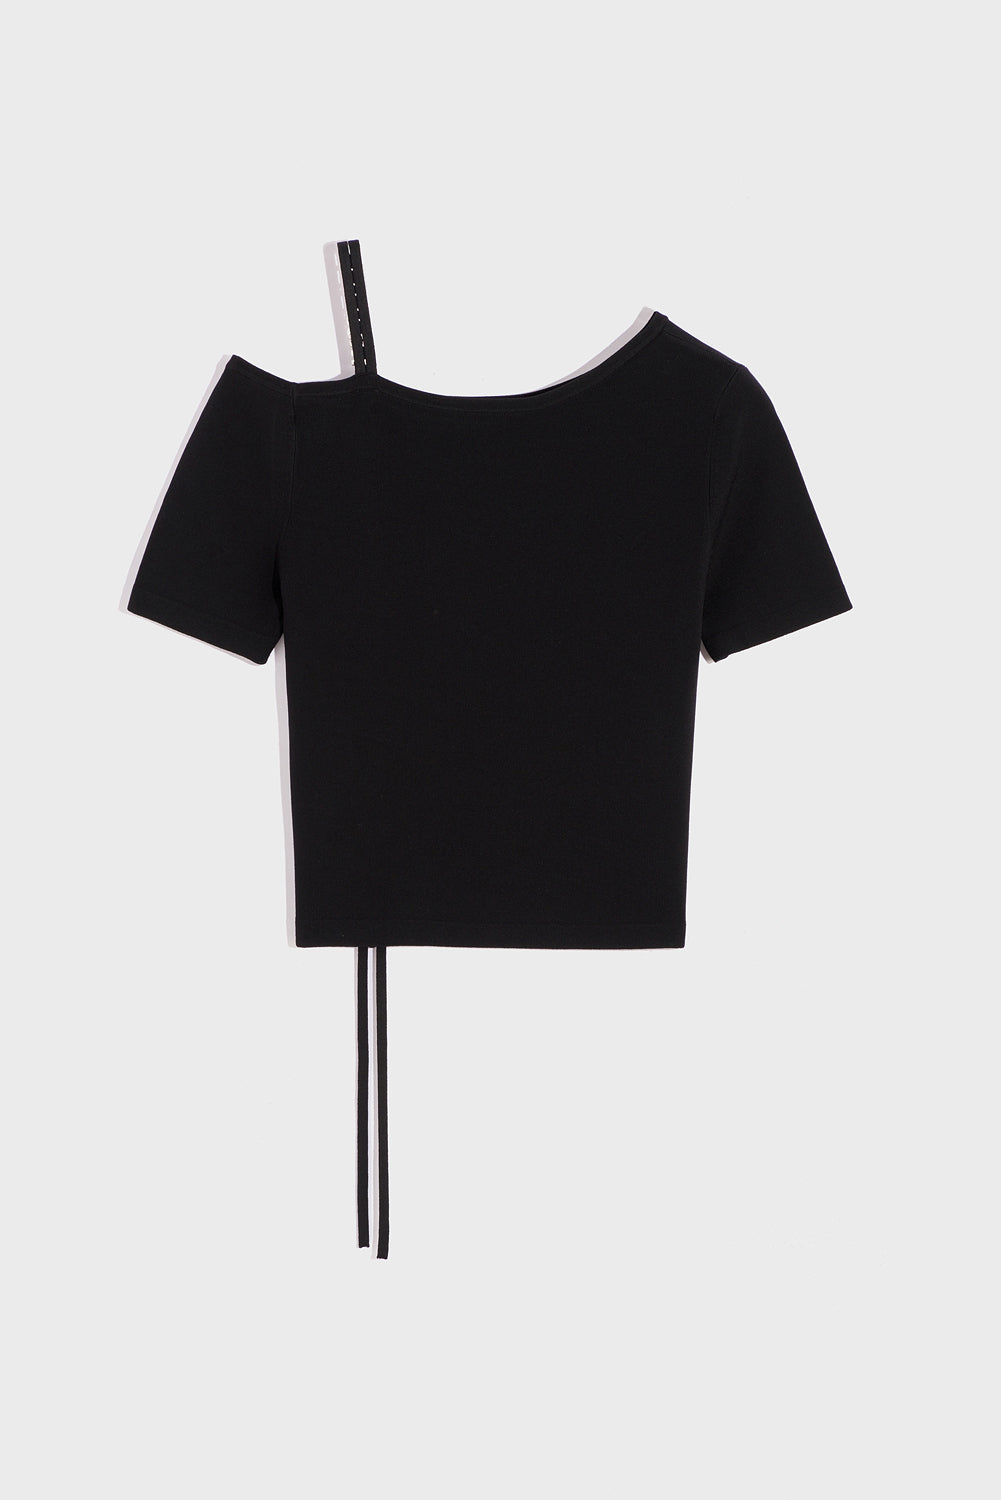 Black T-Shirt Short Sleeve With Side Rouching